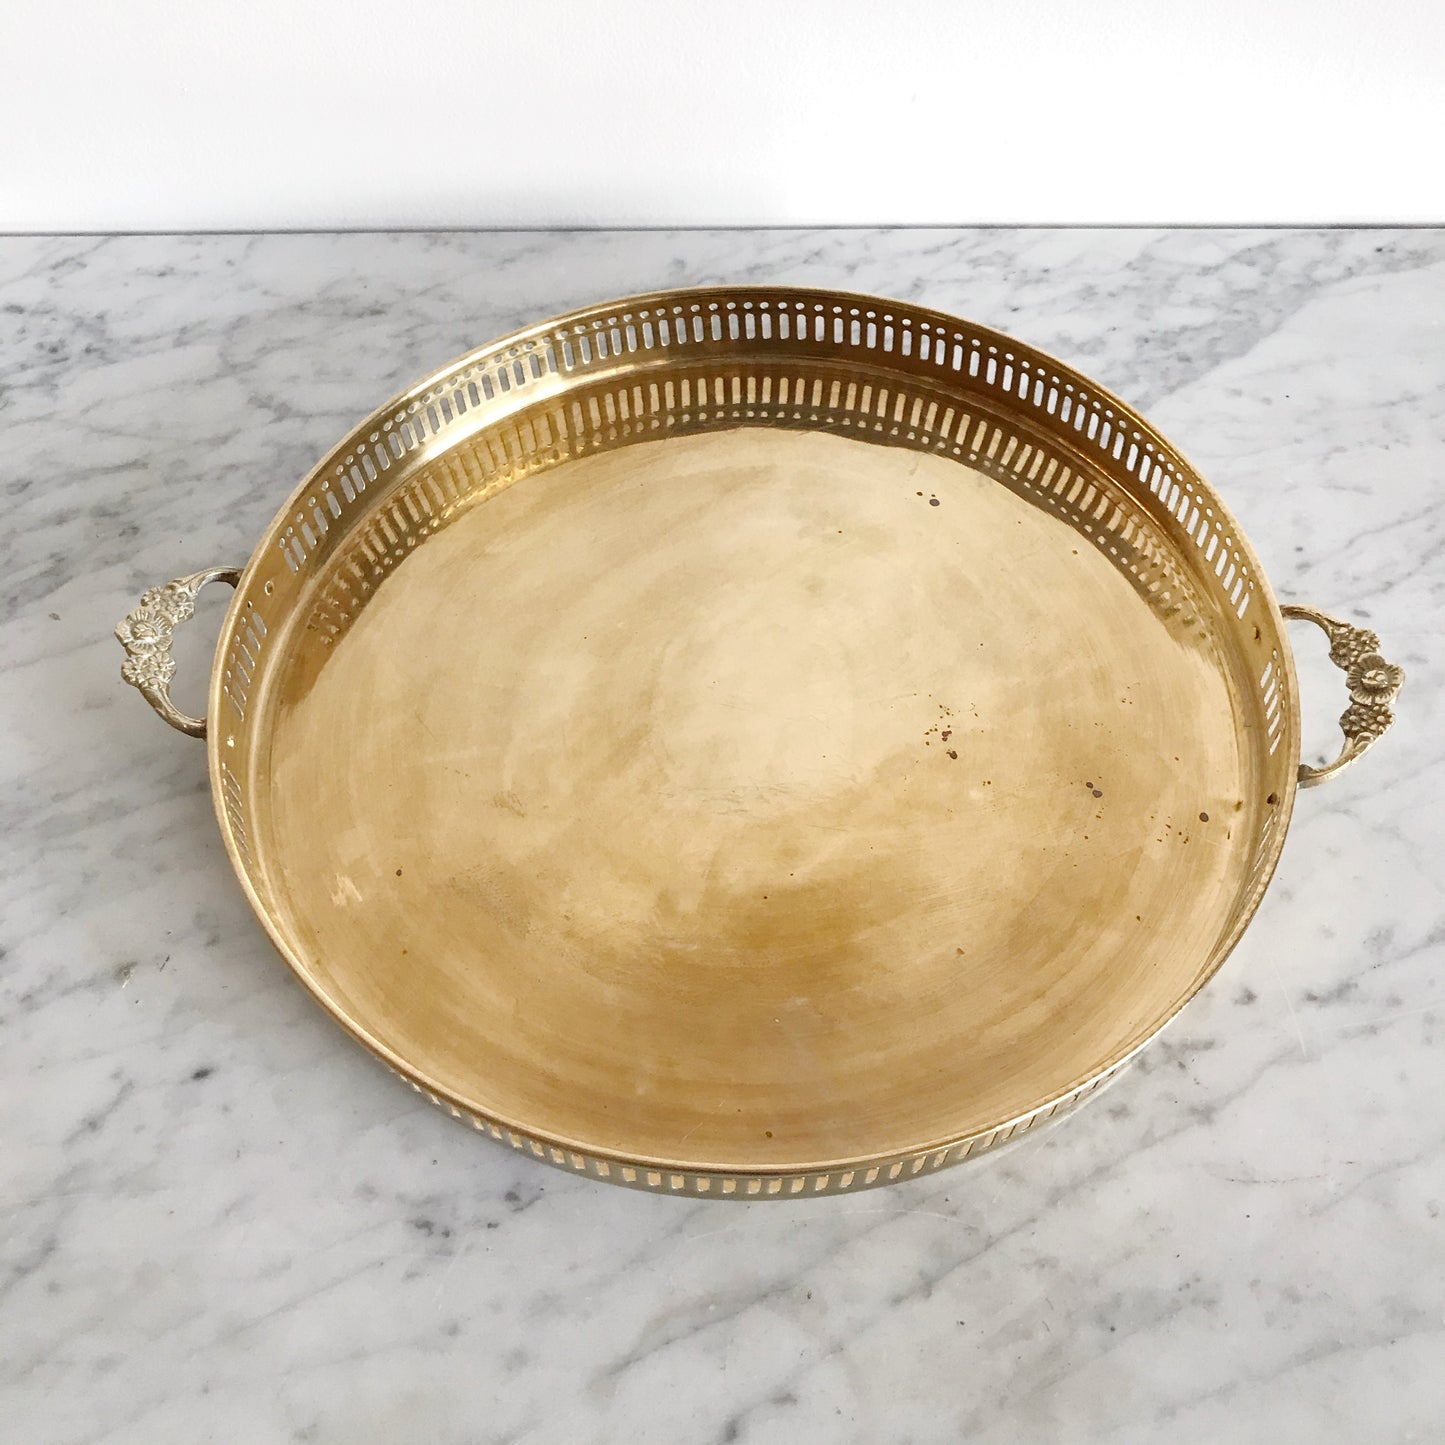 XL Vintage Brass Tray with Floral Handles, 13”